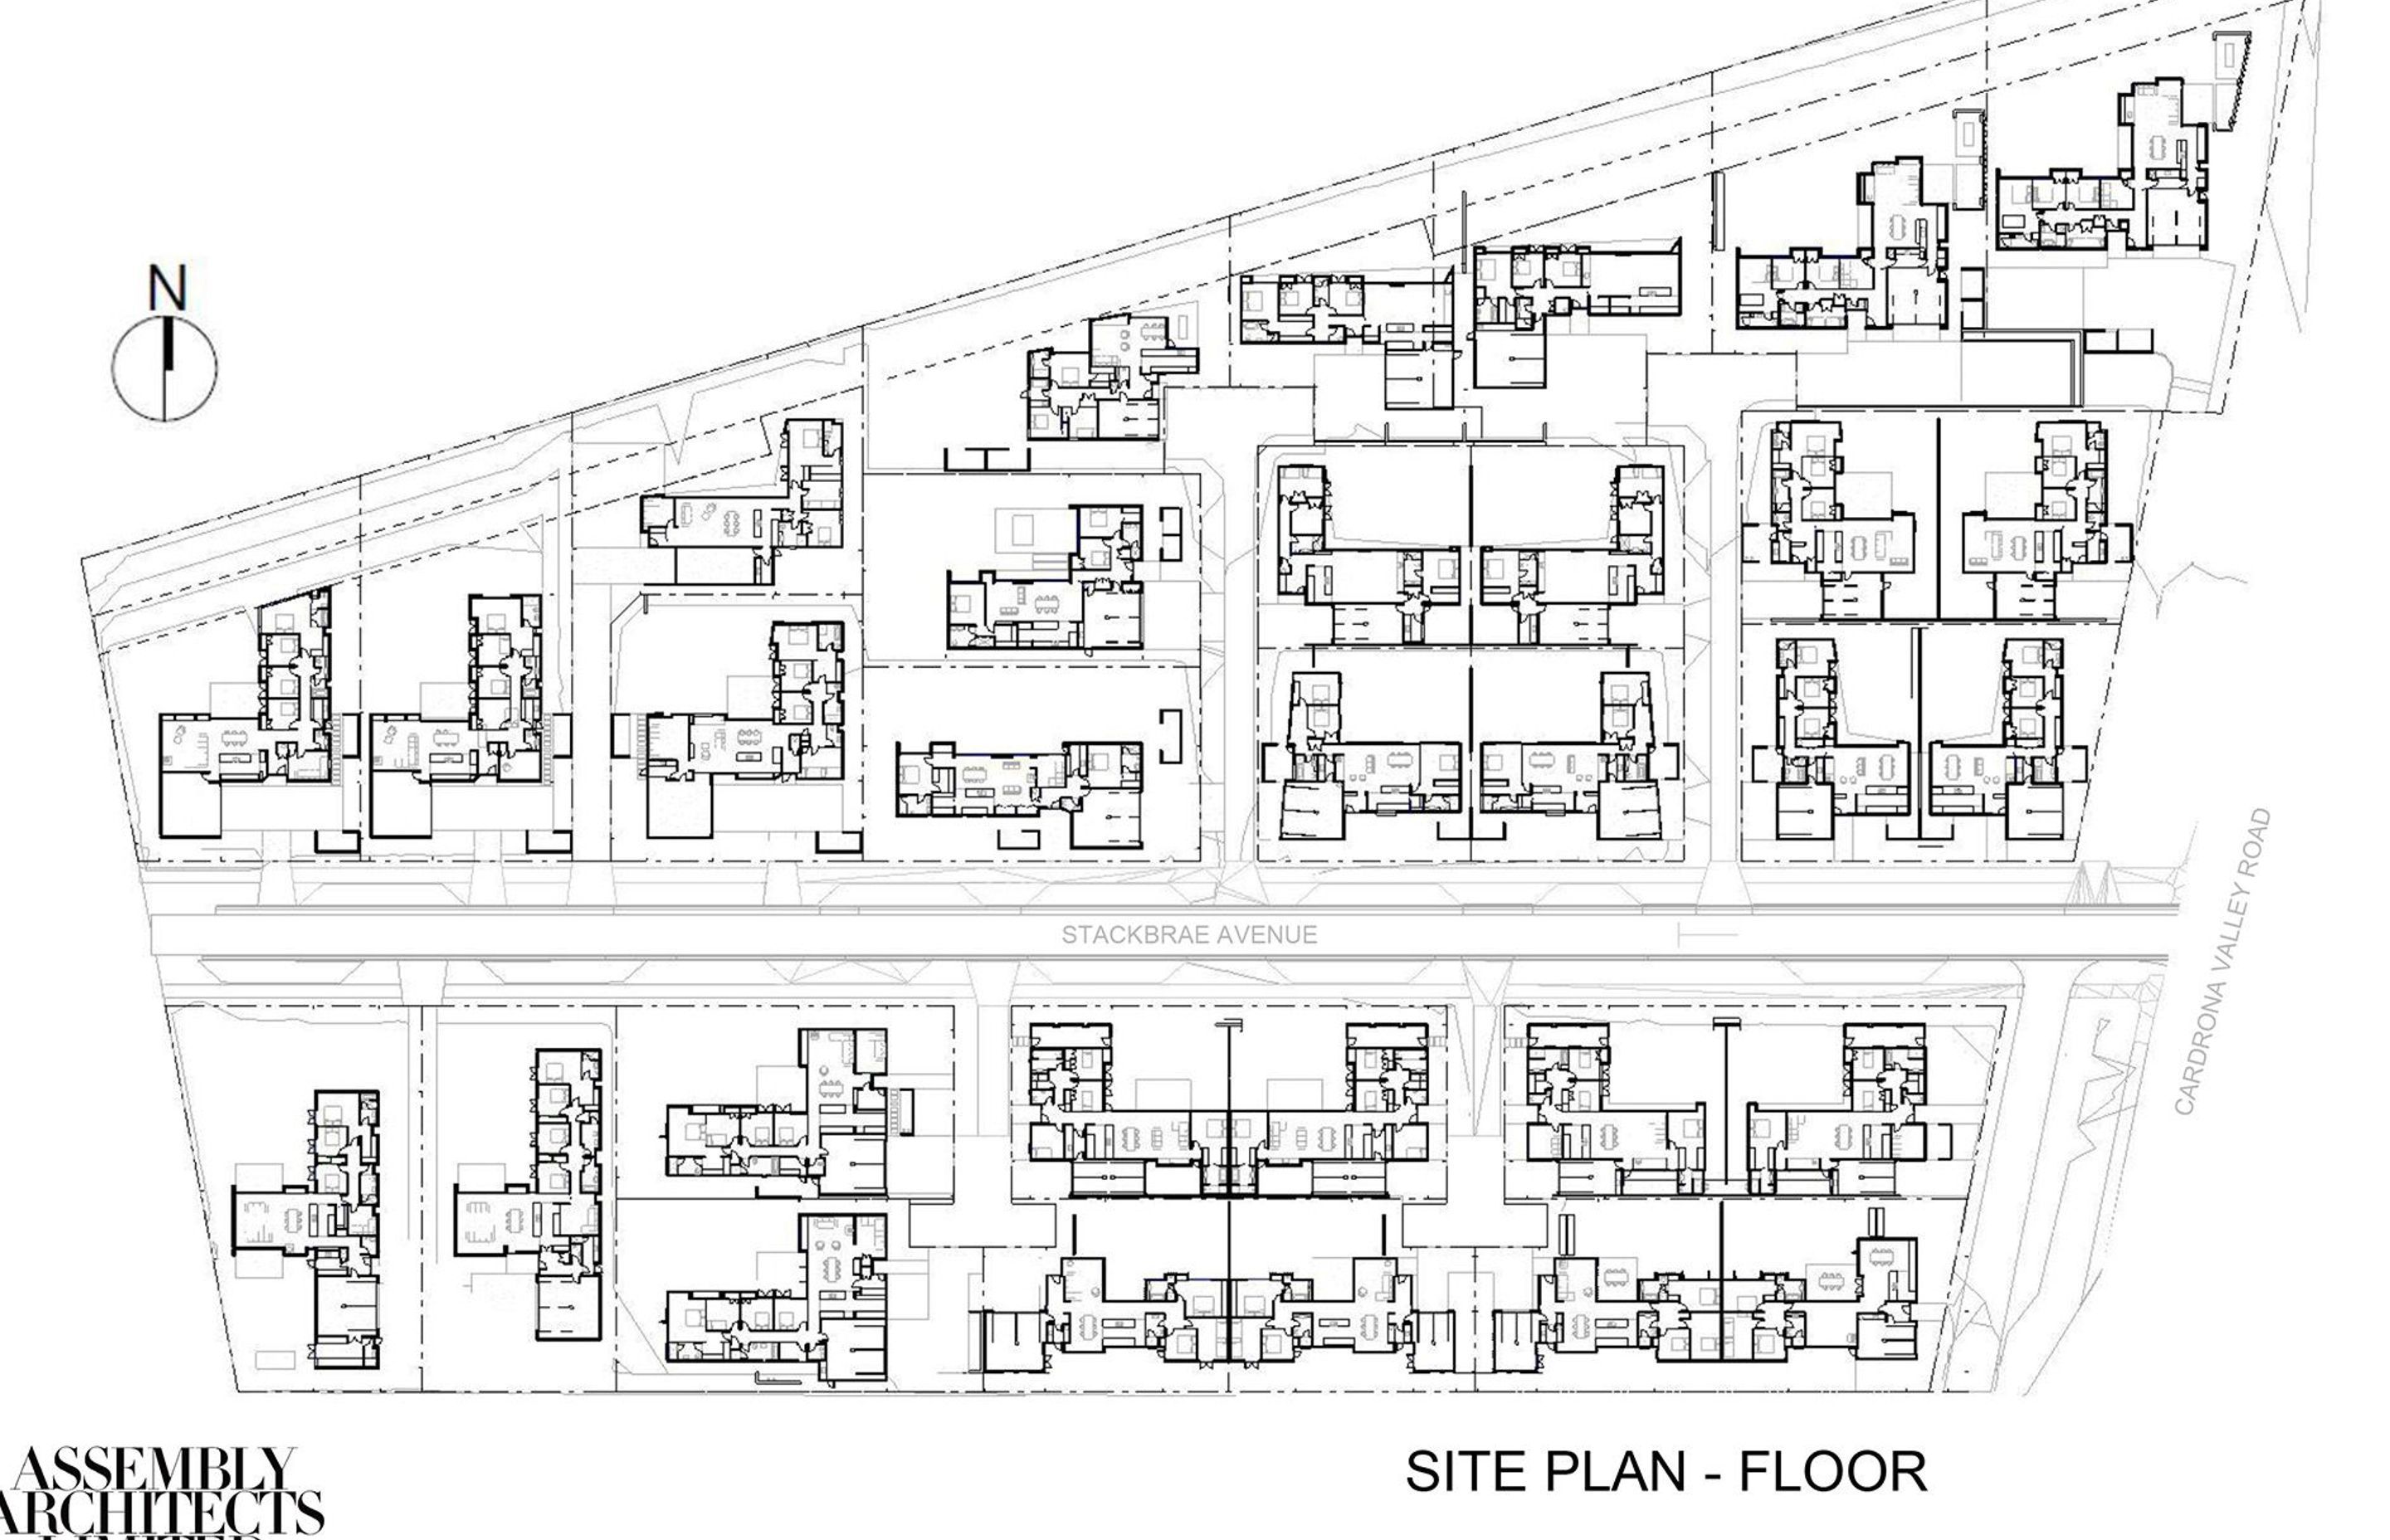 Site plan – floor by Assembly Architects.